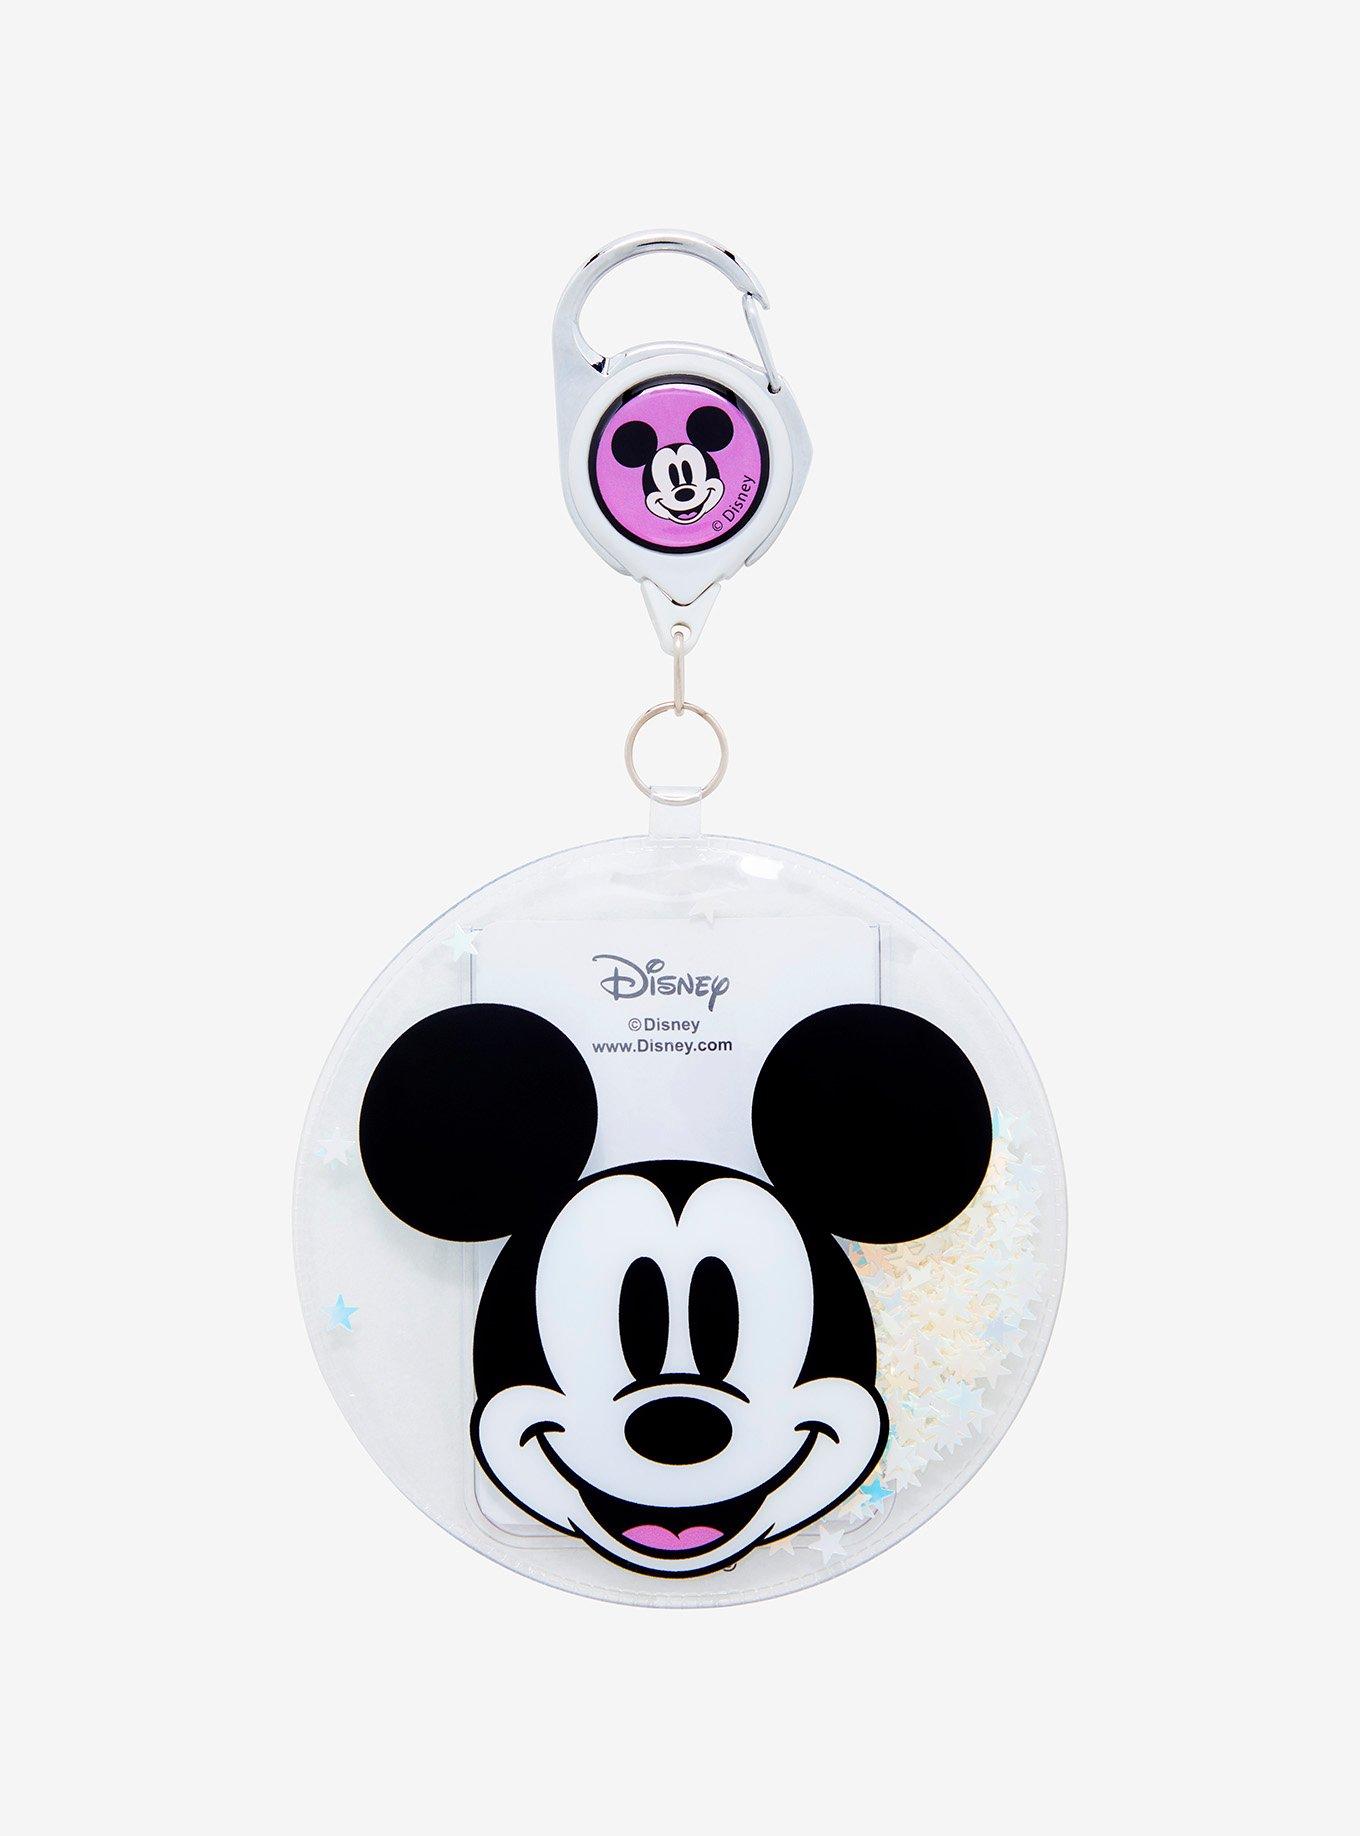 Minnie Mouse Inspired Badge Reel, Castle Badge Reel, Princess Castle Badge Reel, Cute Glitter Badge Reel, Retractable ID Badge Holder